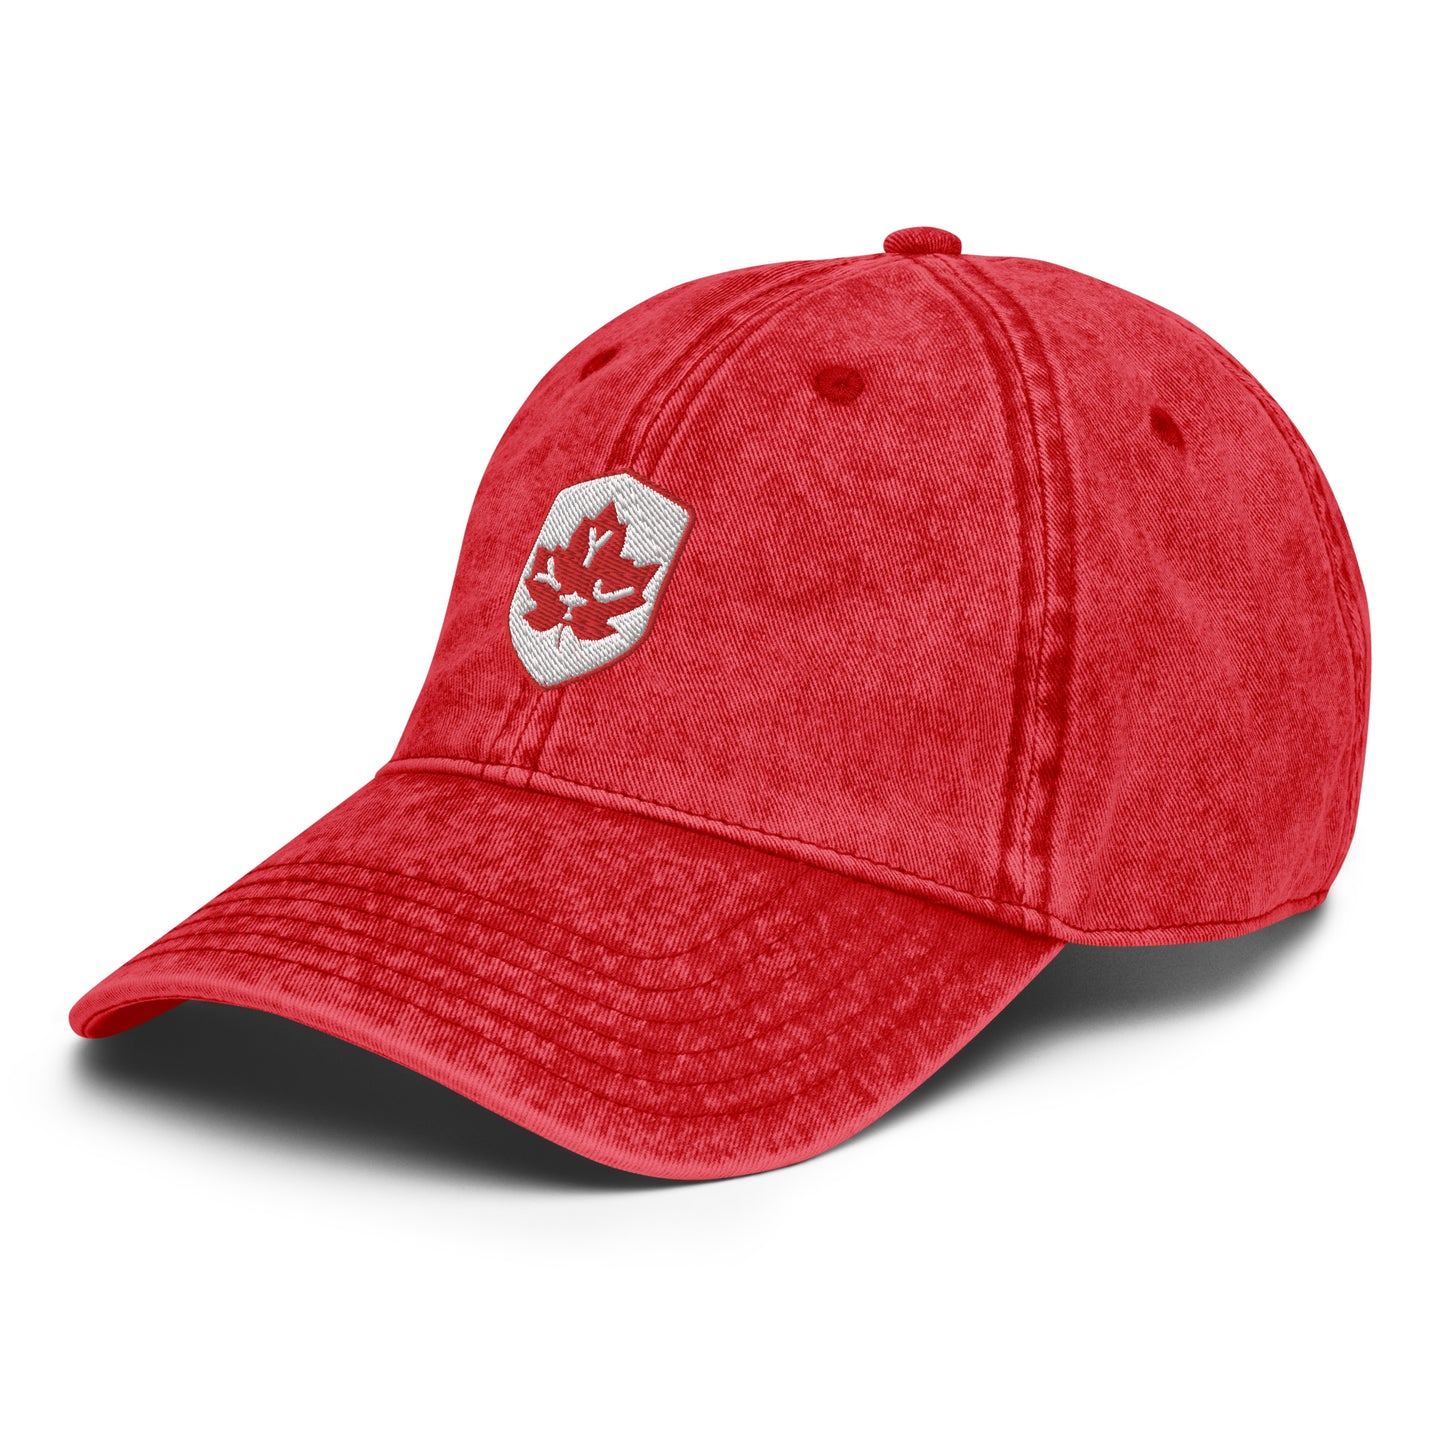 Maple Leaf Twill Cap - Red/White • YYJ Victoria • YHM Designs - Image 20